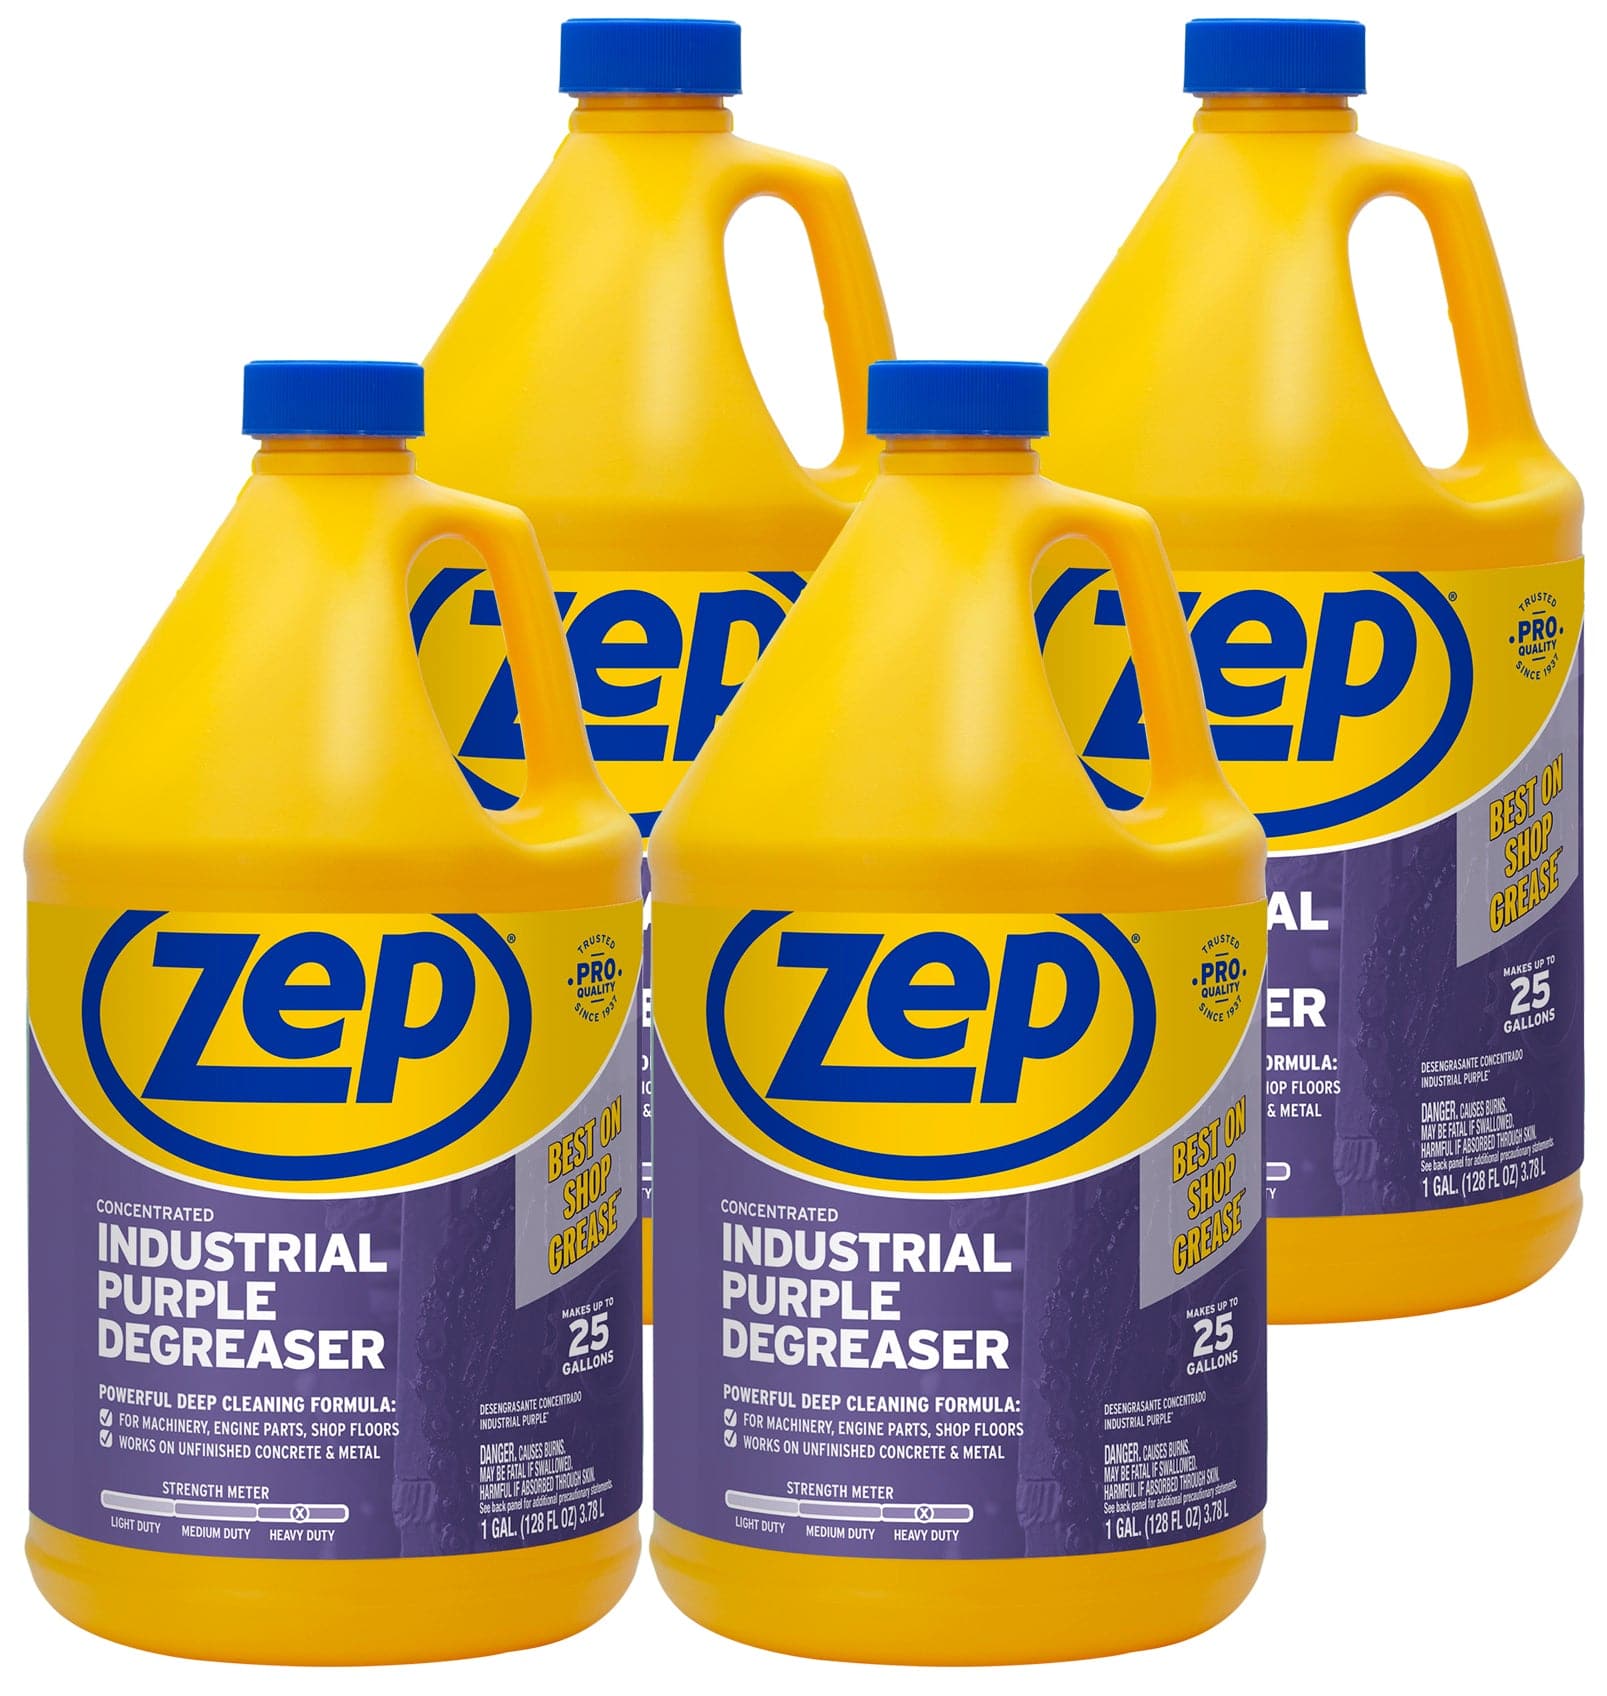 Zep Commercial Concentrate Industrial Purple Degreaser and Cleaner, 5 gal.